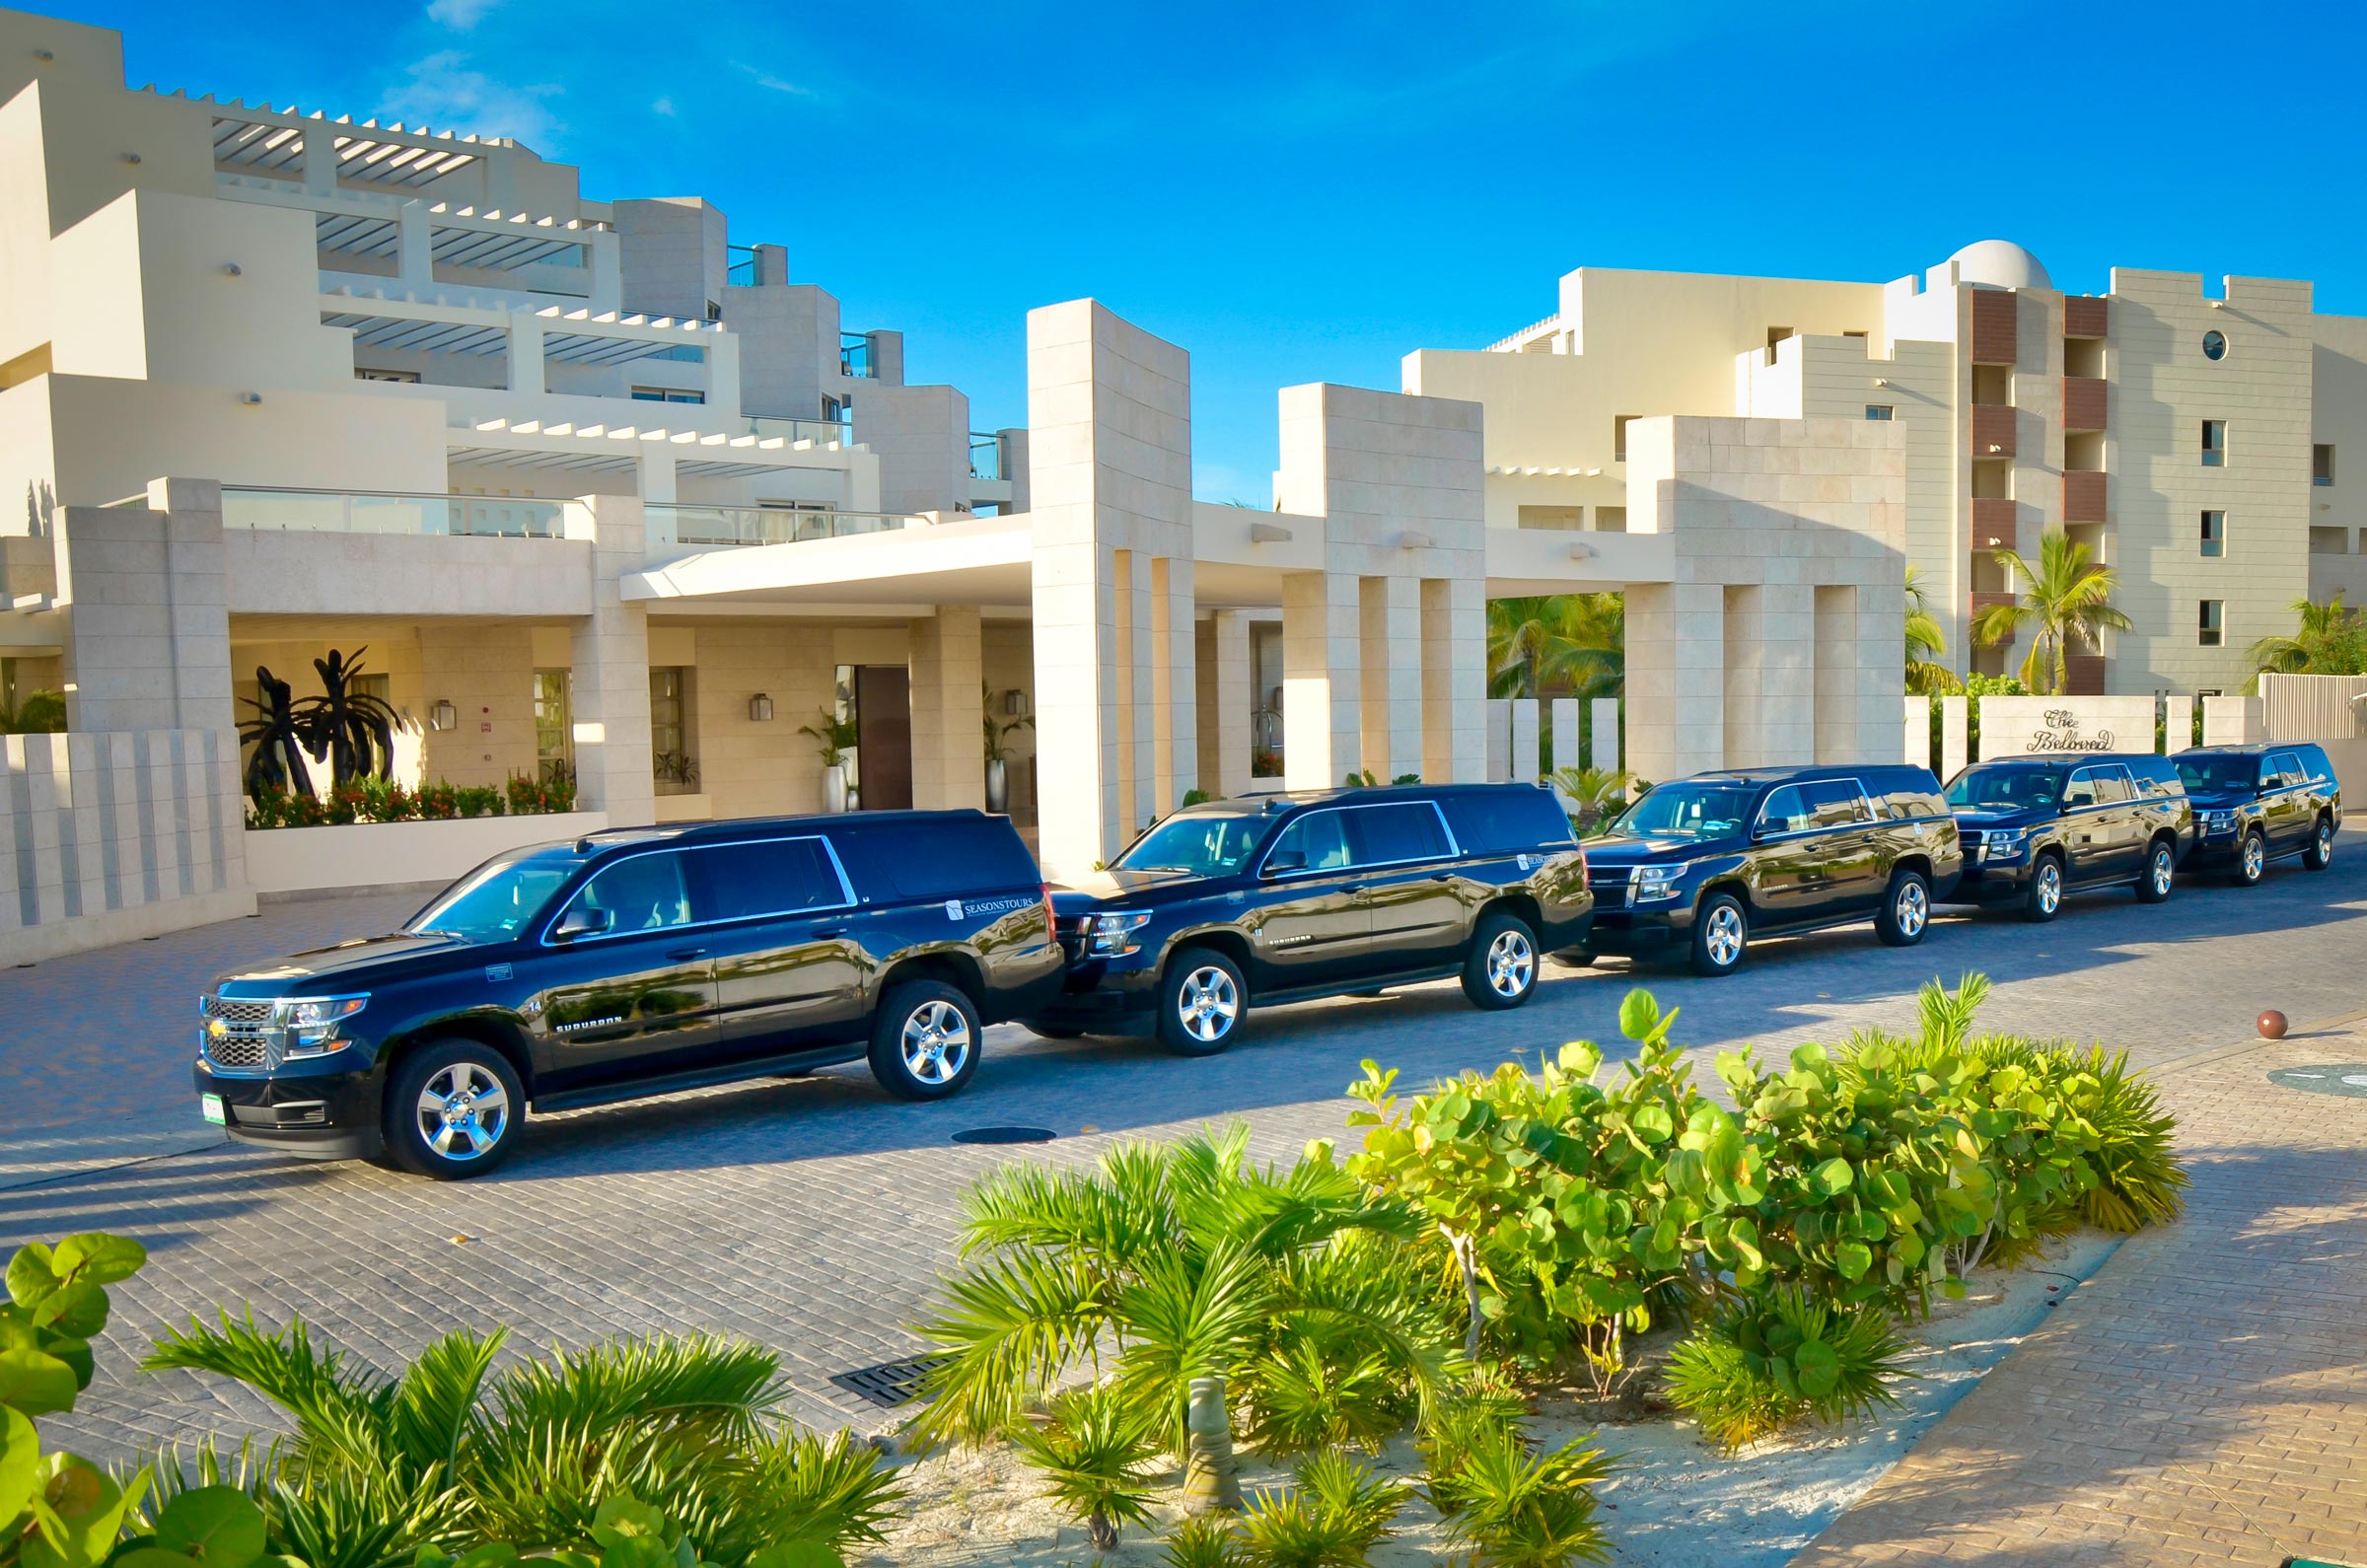 Transport from Cancun International Airport to your hotel in a luxury SUV